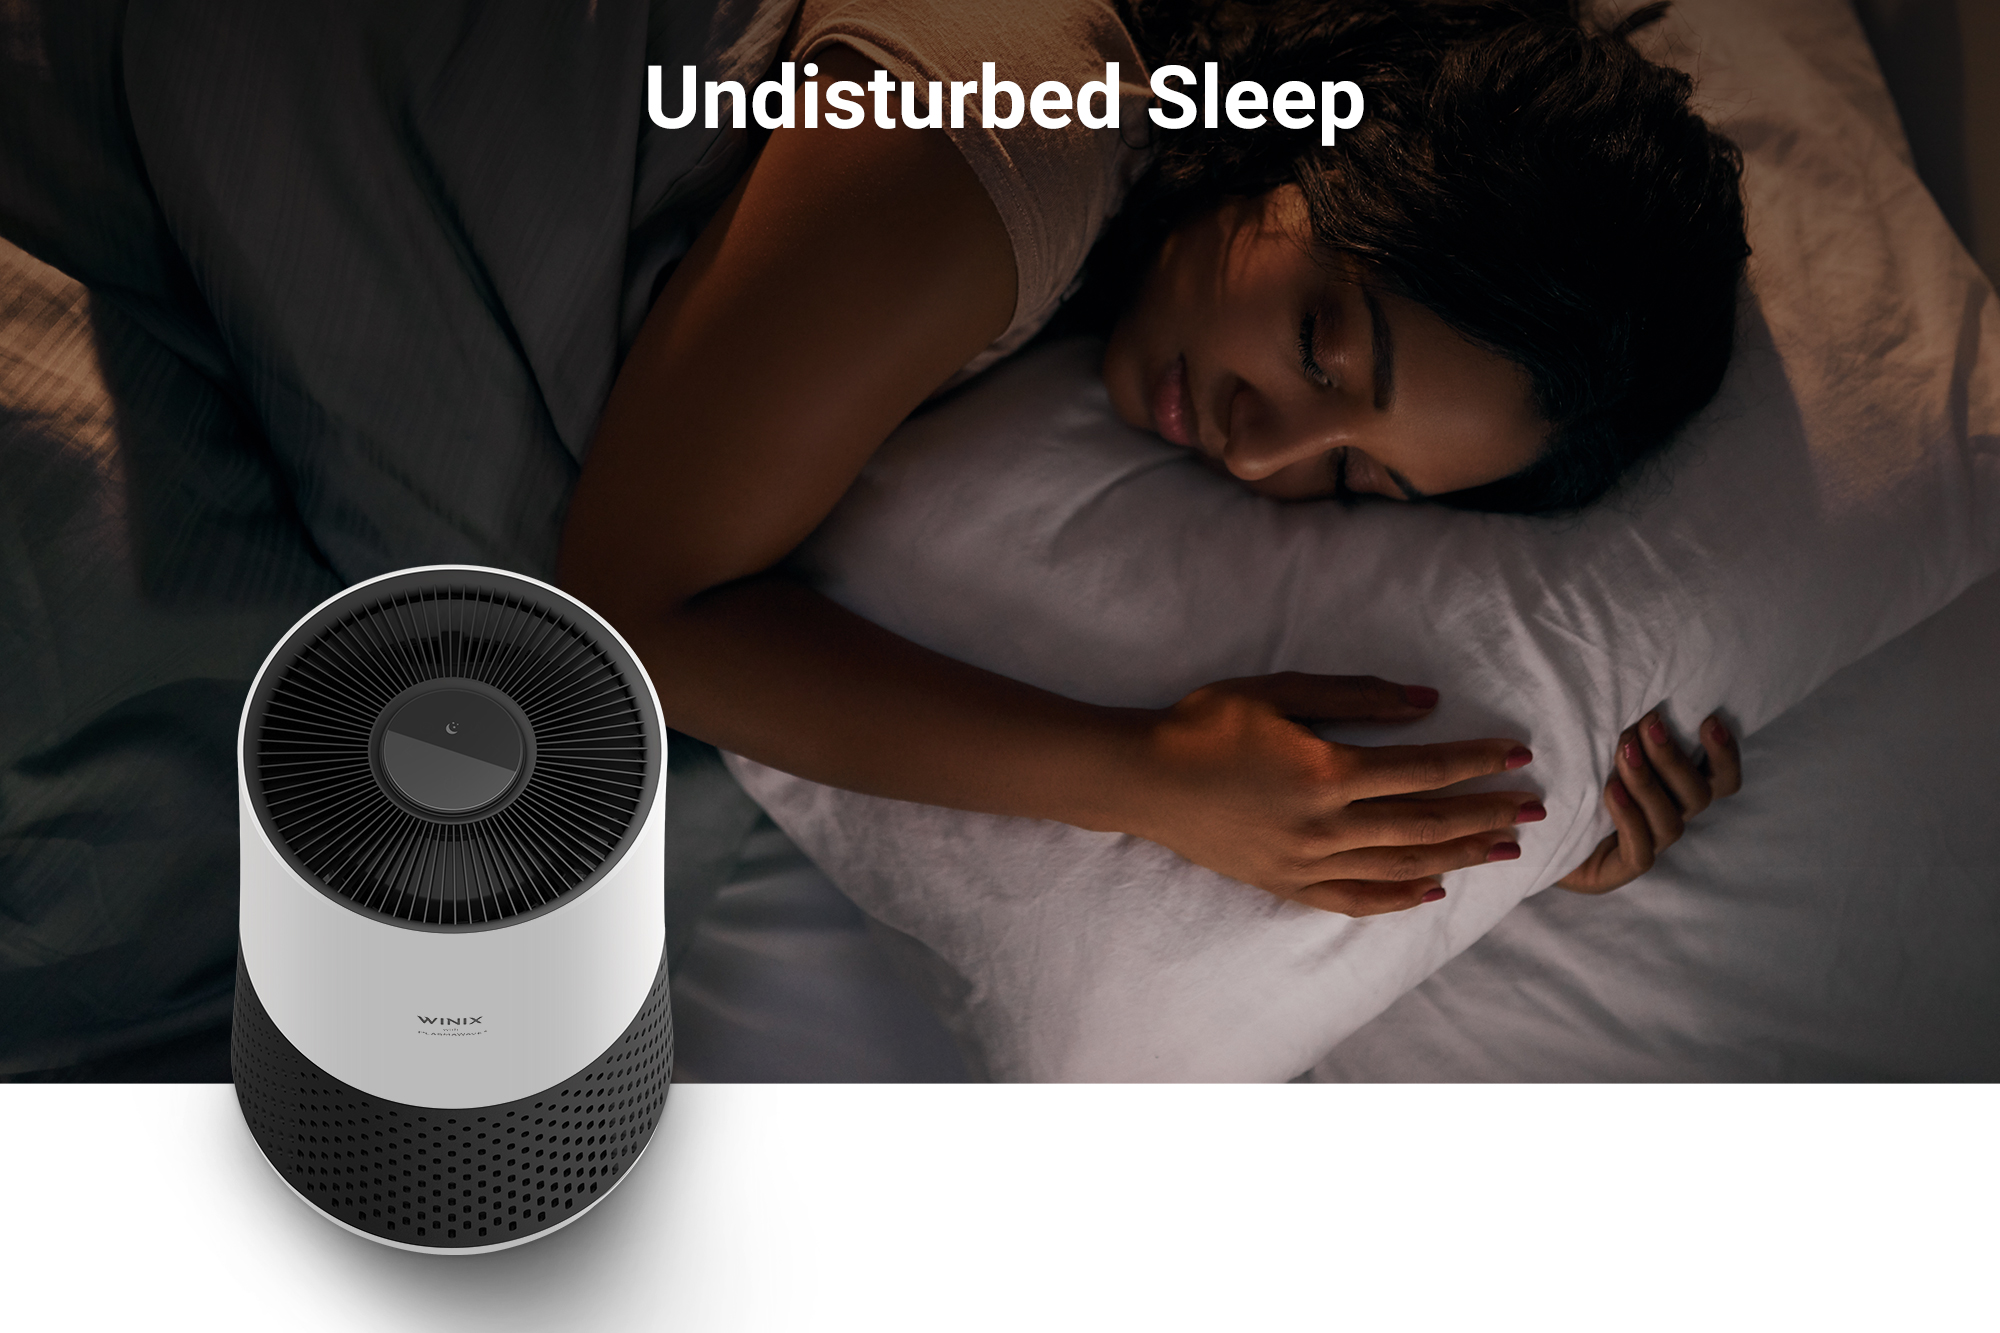 A231 air purifier next to sleeping woman and text saying undisturbed sleep